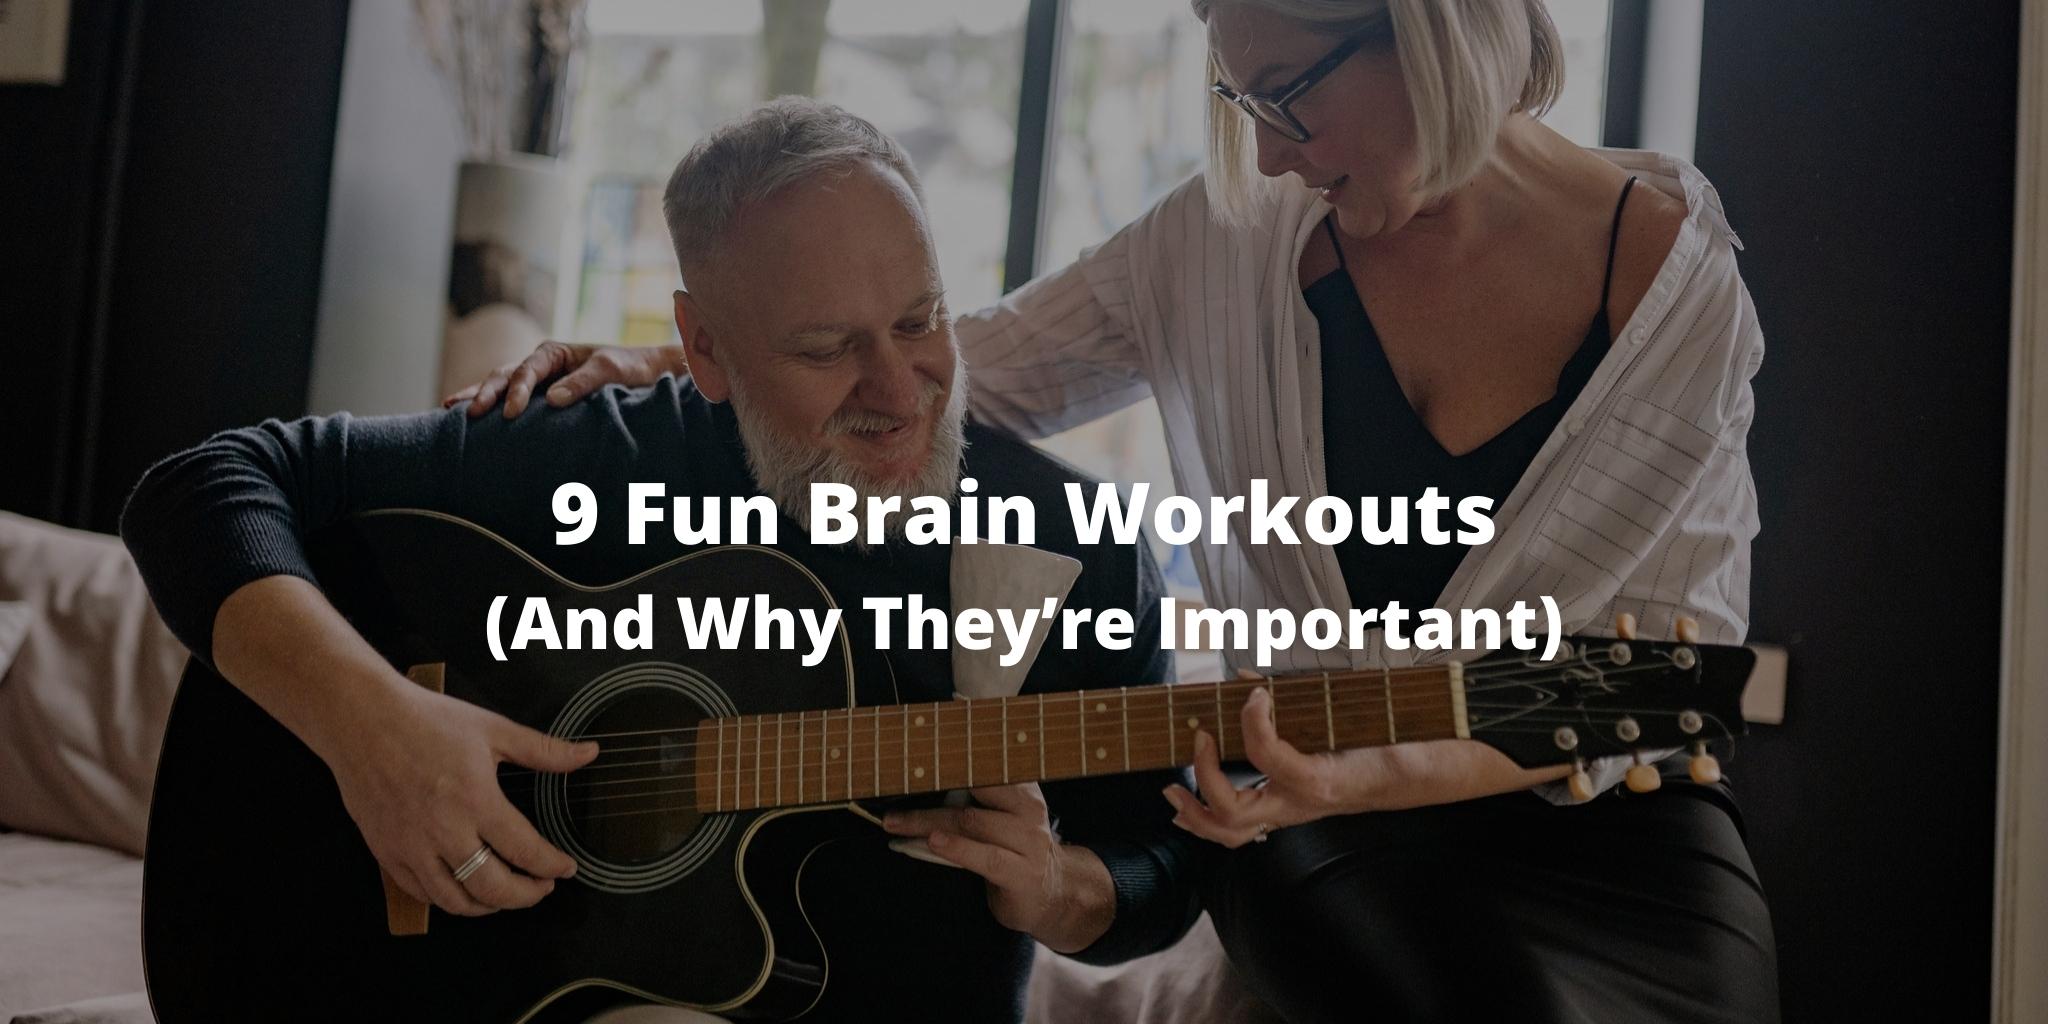 9 Fun Brain Workouts (And Why They’re Important)